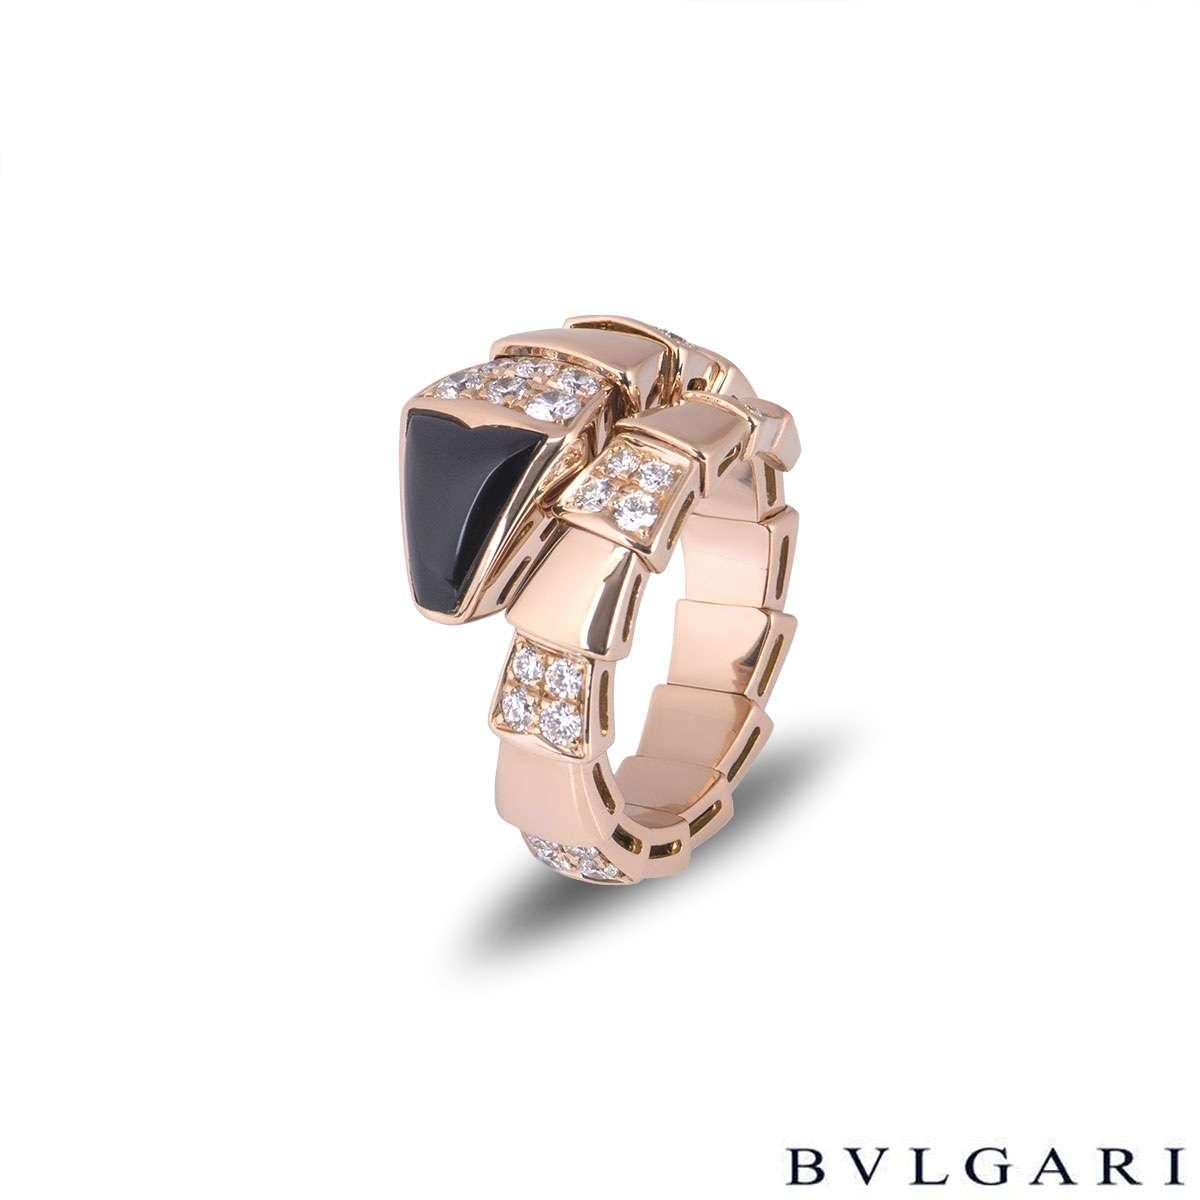 An 18k rose gold Bvlgari onyx and diamond ring from the Serpenti collection. The ring is in the form of a serpent wrapping around the finger with an onyx head and featuring alternating high polish flexible intersections and diamond set links. The